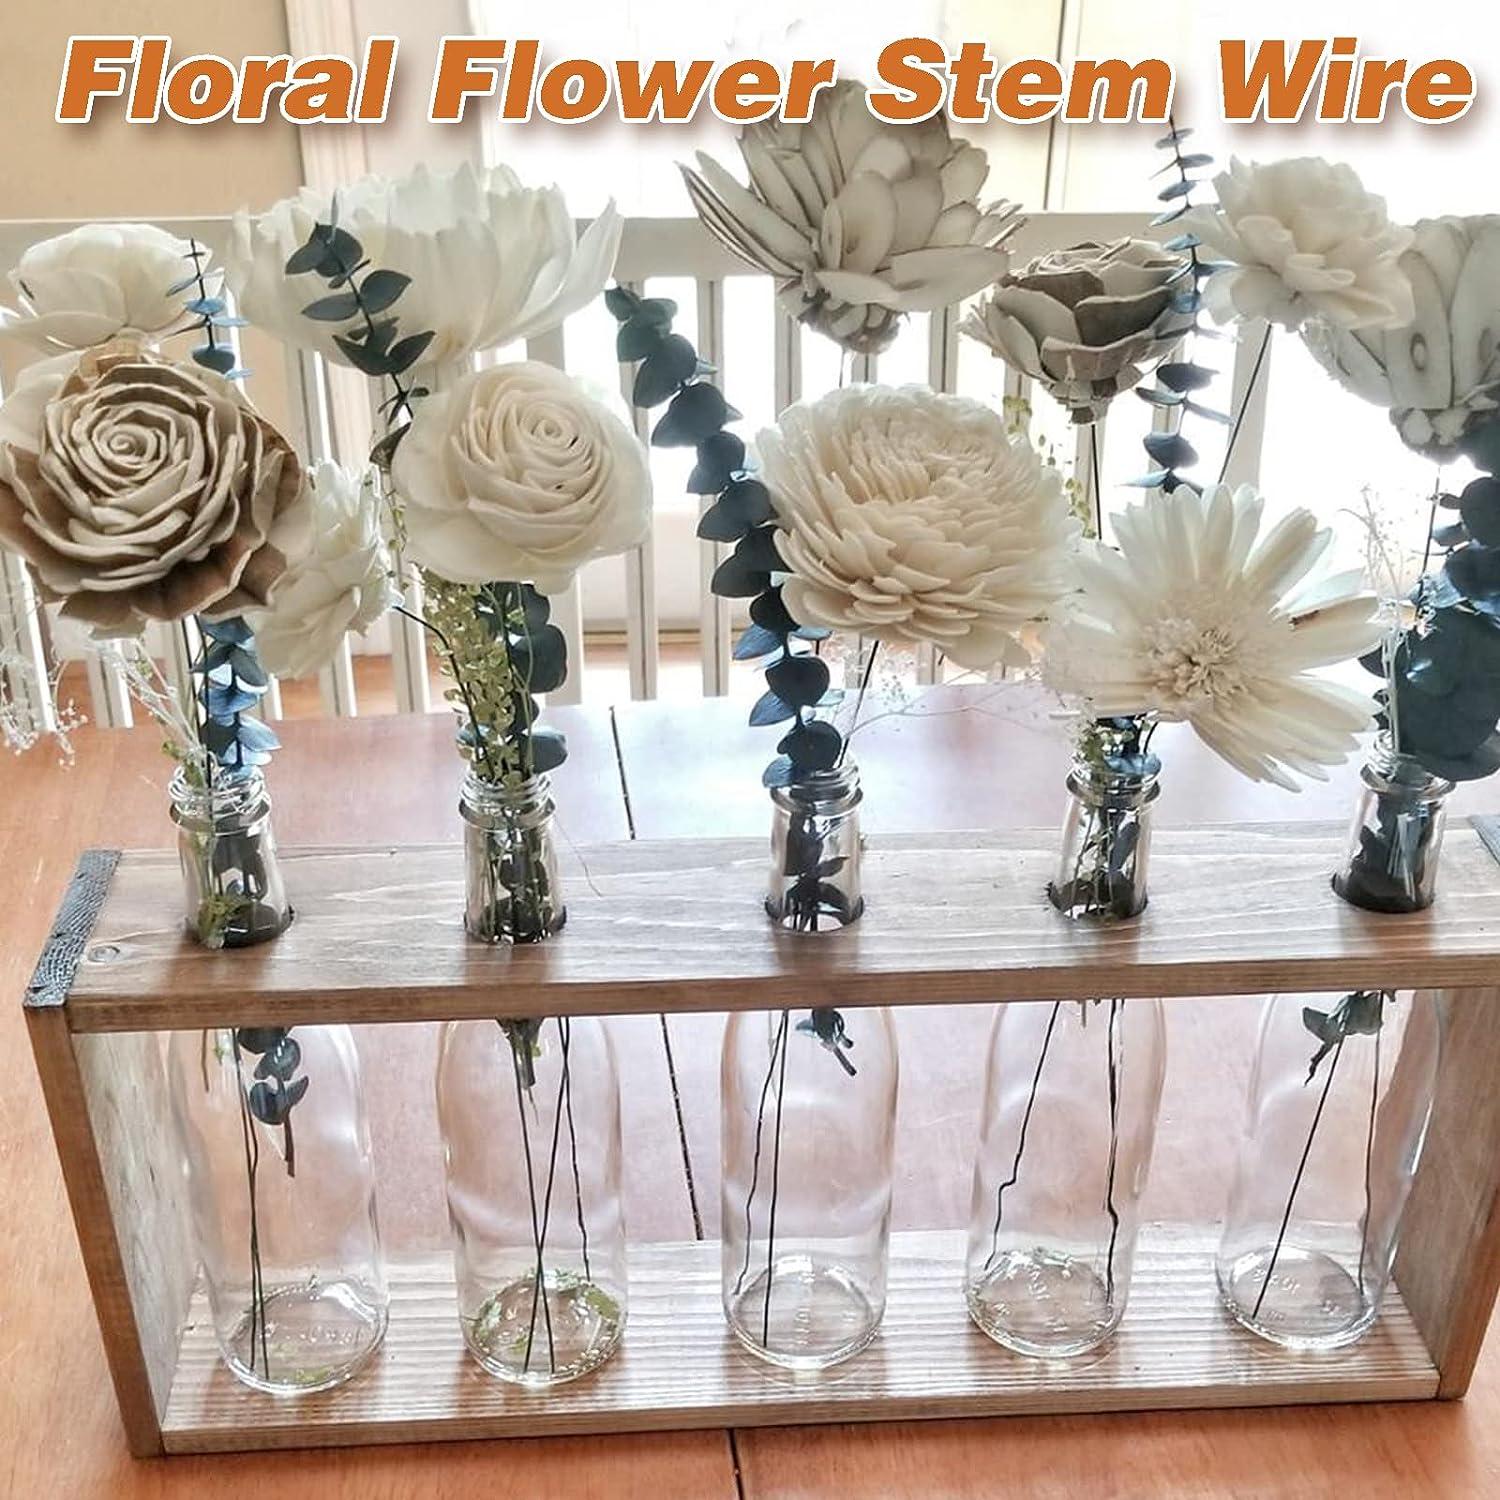 300 Pieces 22 Gauge Floral Wire Stems for DIY Crafts, Artificial Flowers,  16 In